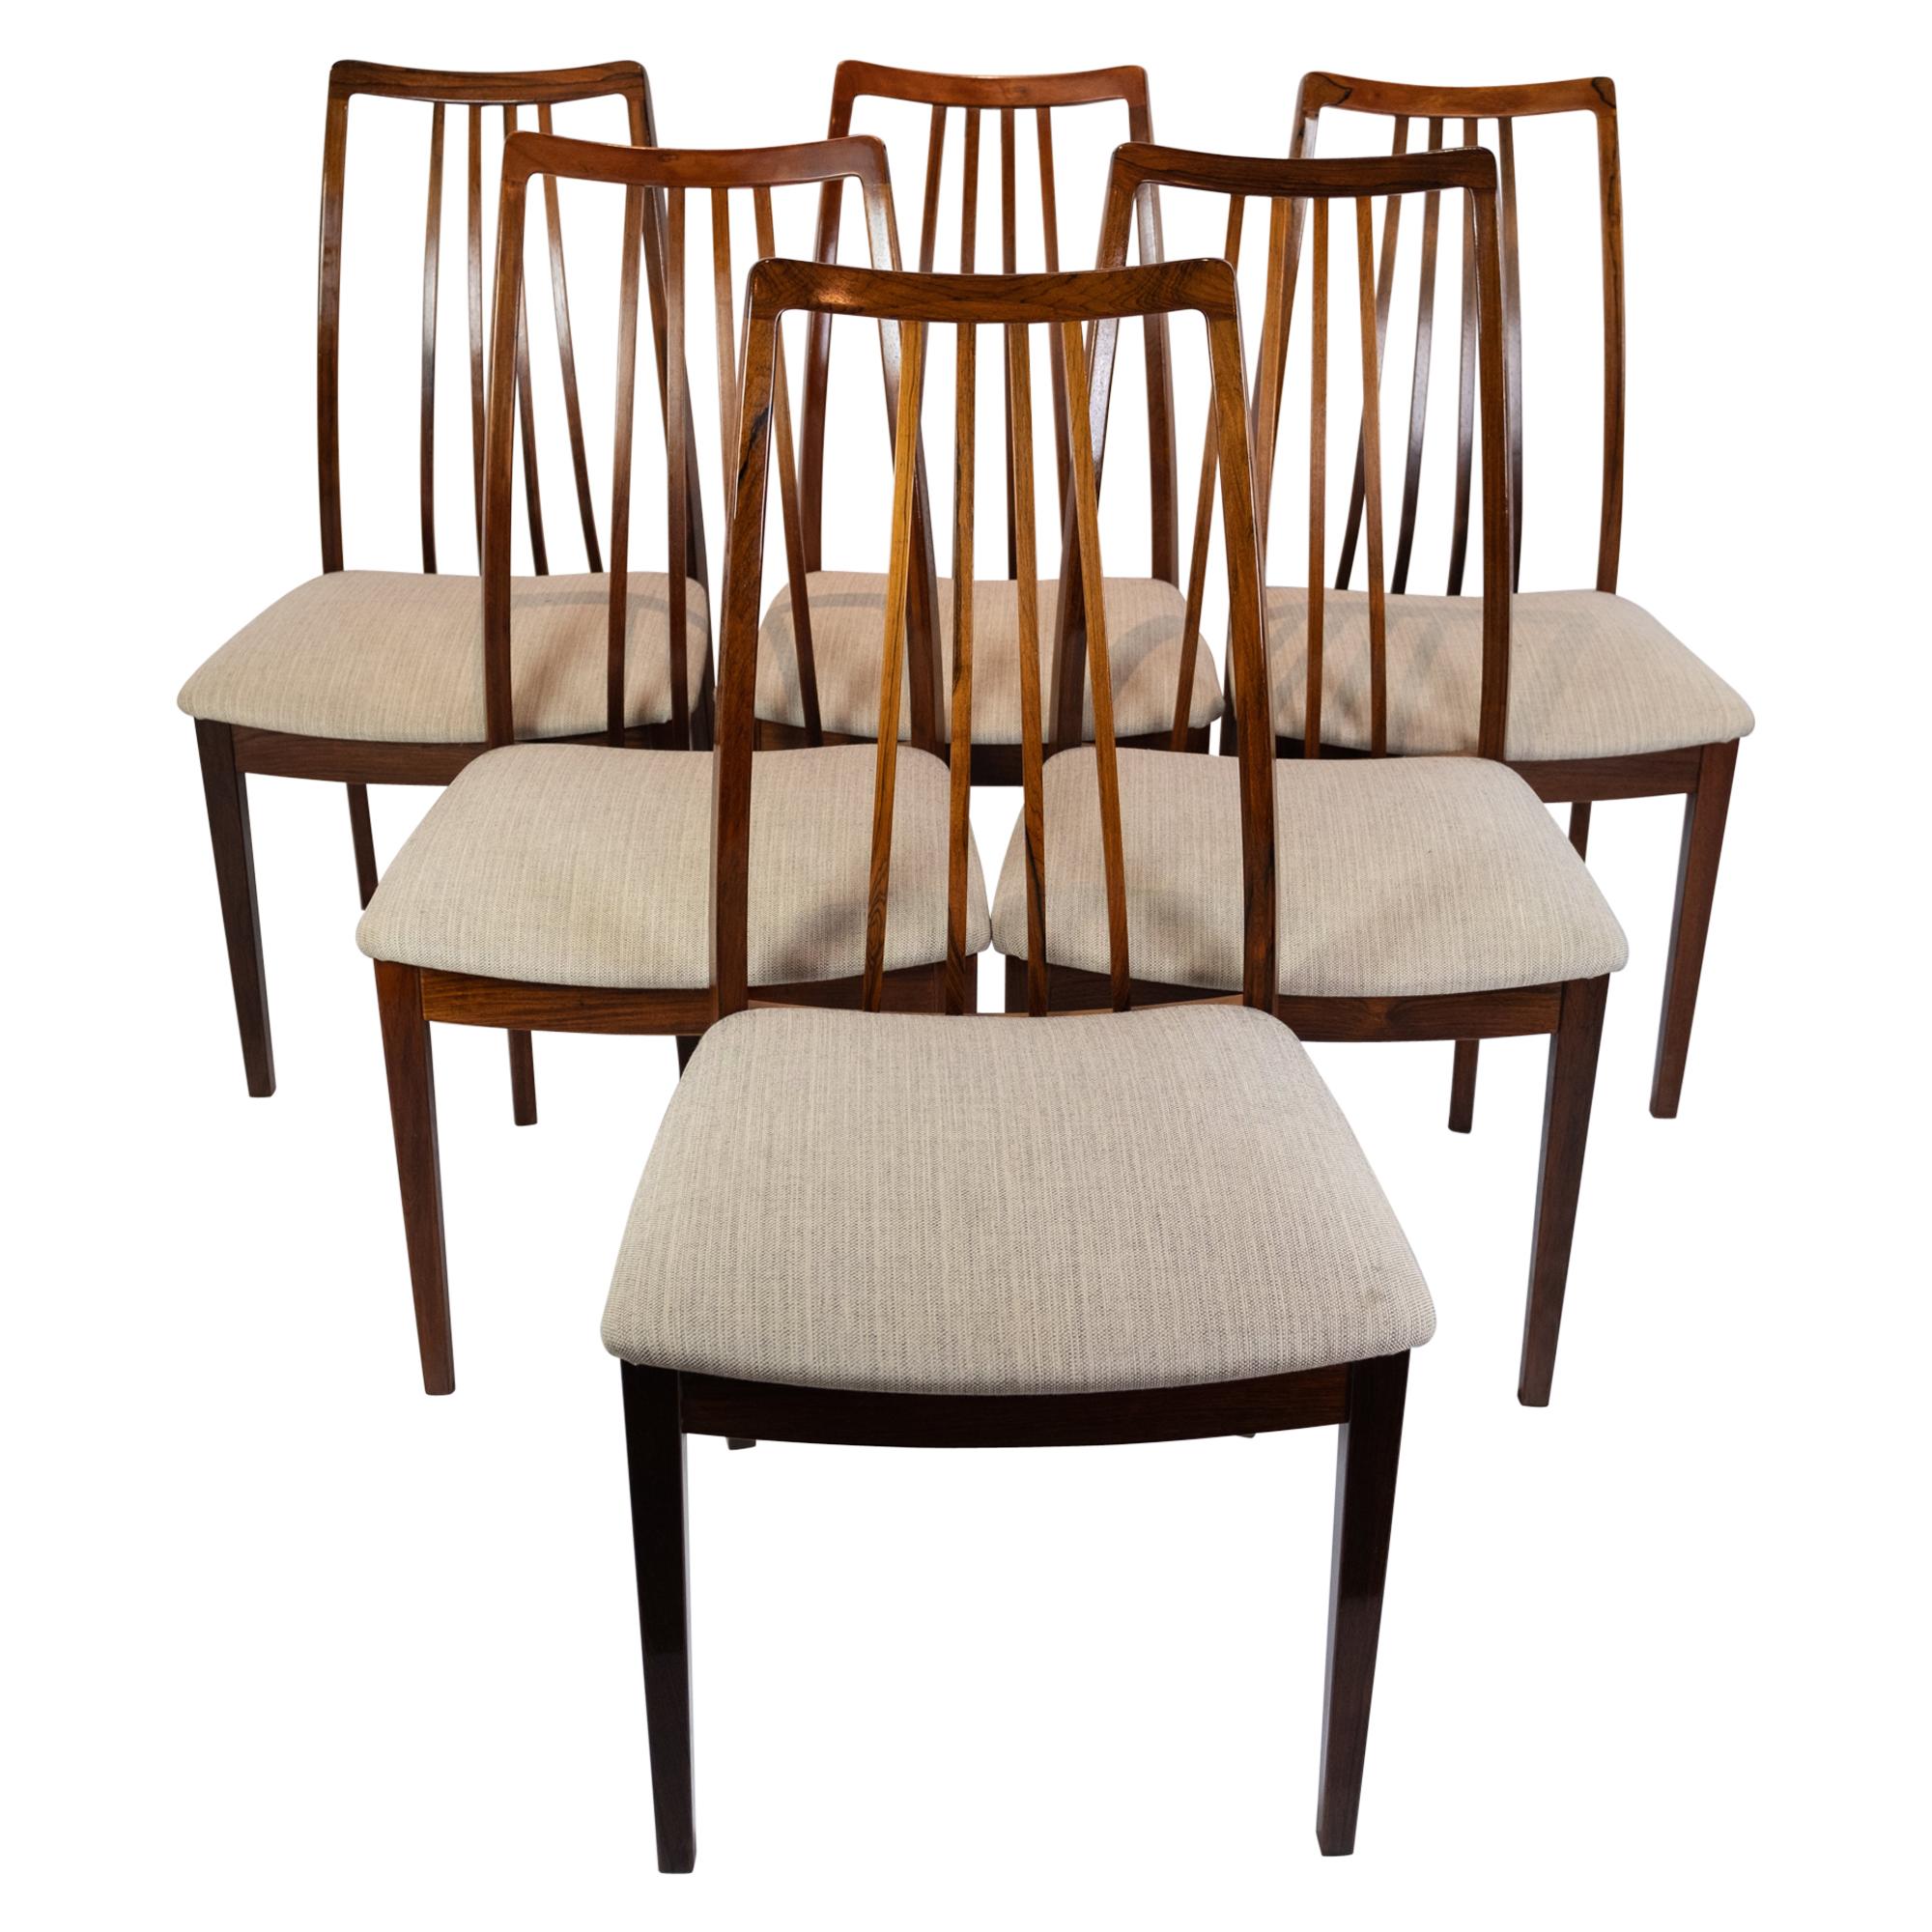 Set of Six Dining Room Chairs of Rosewood of Danish Design, 1960s